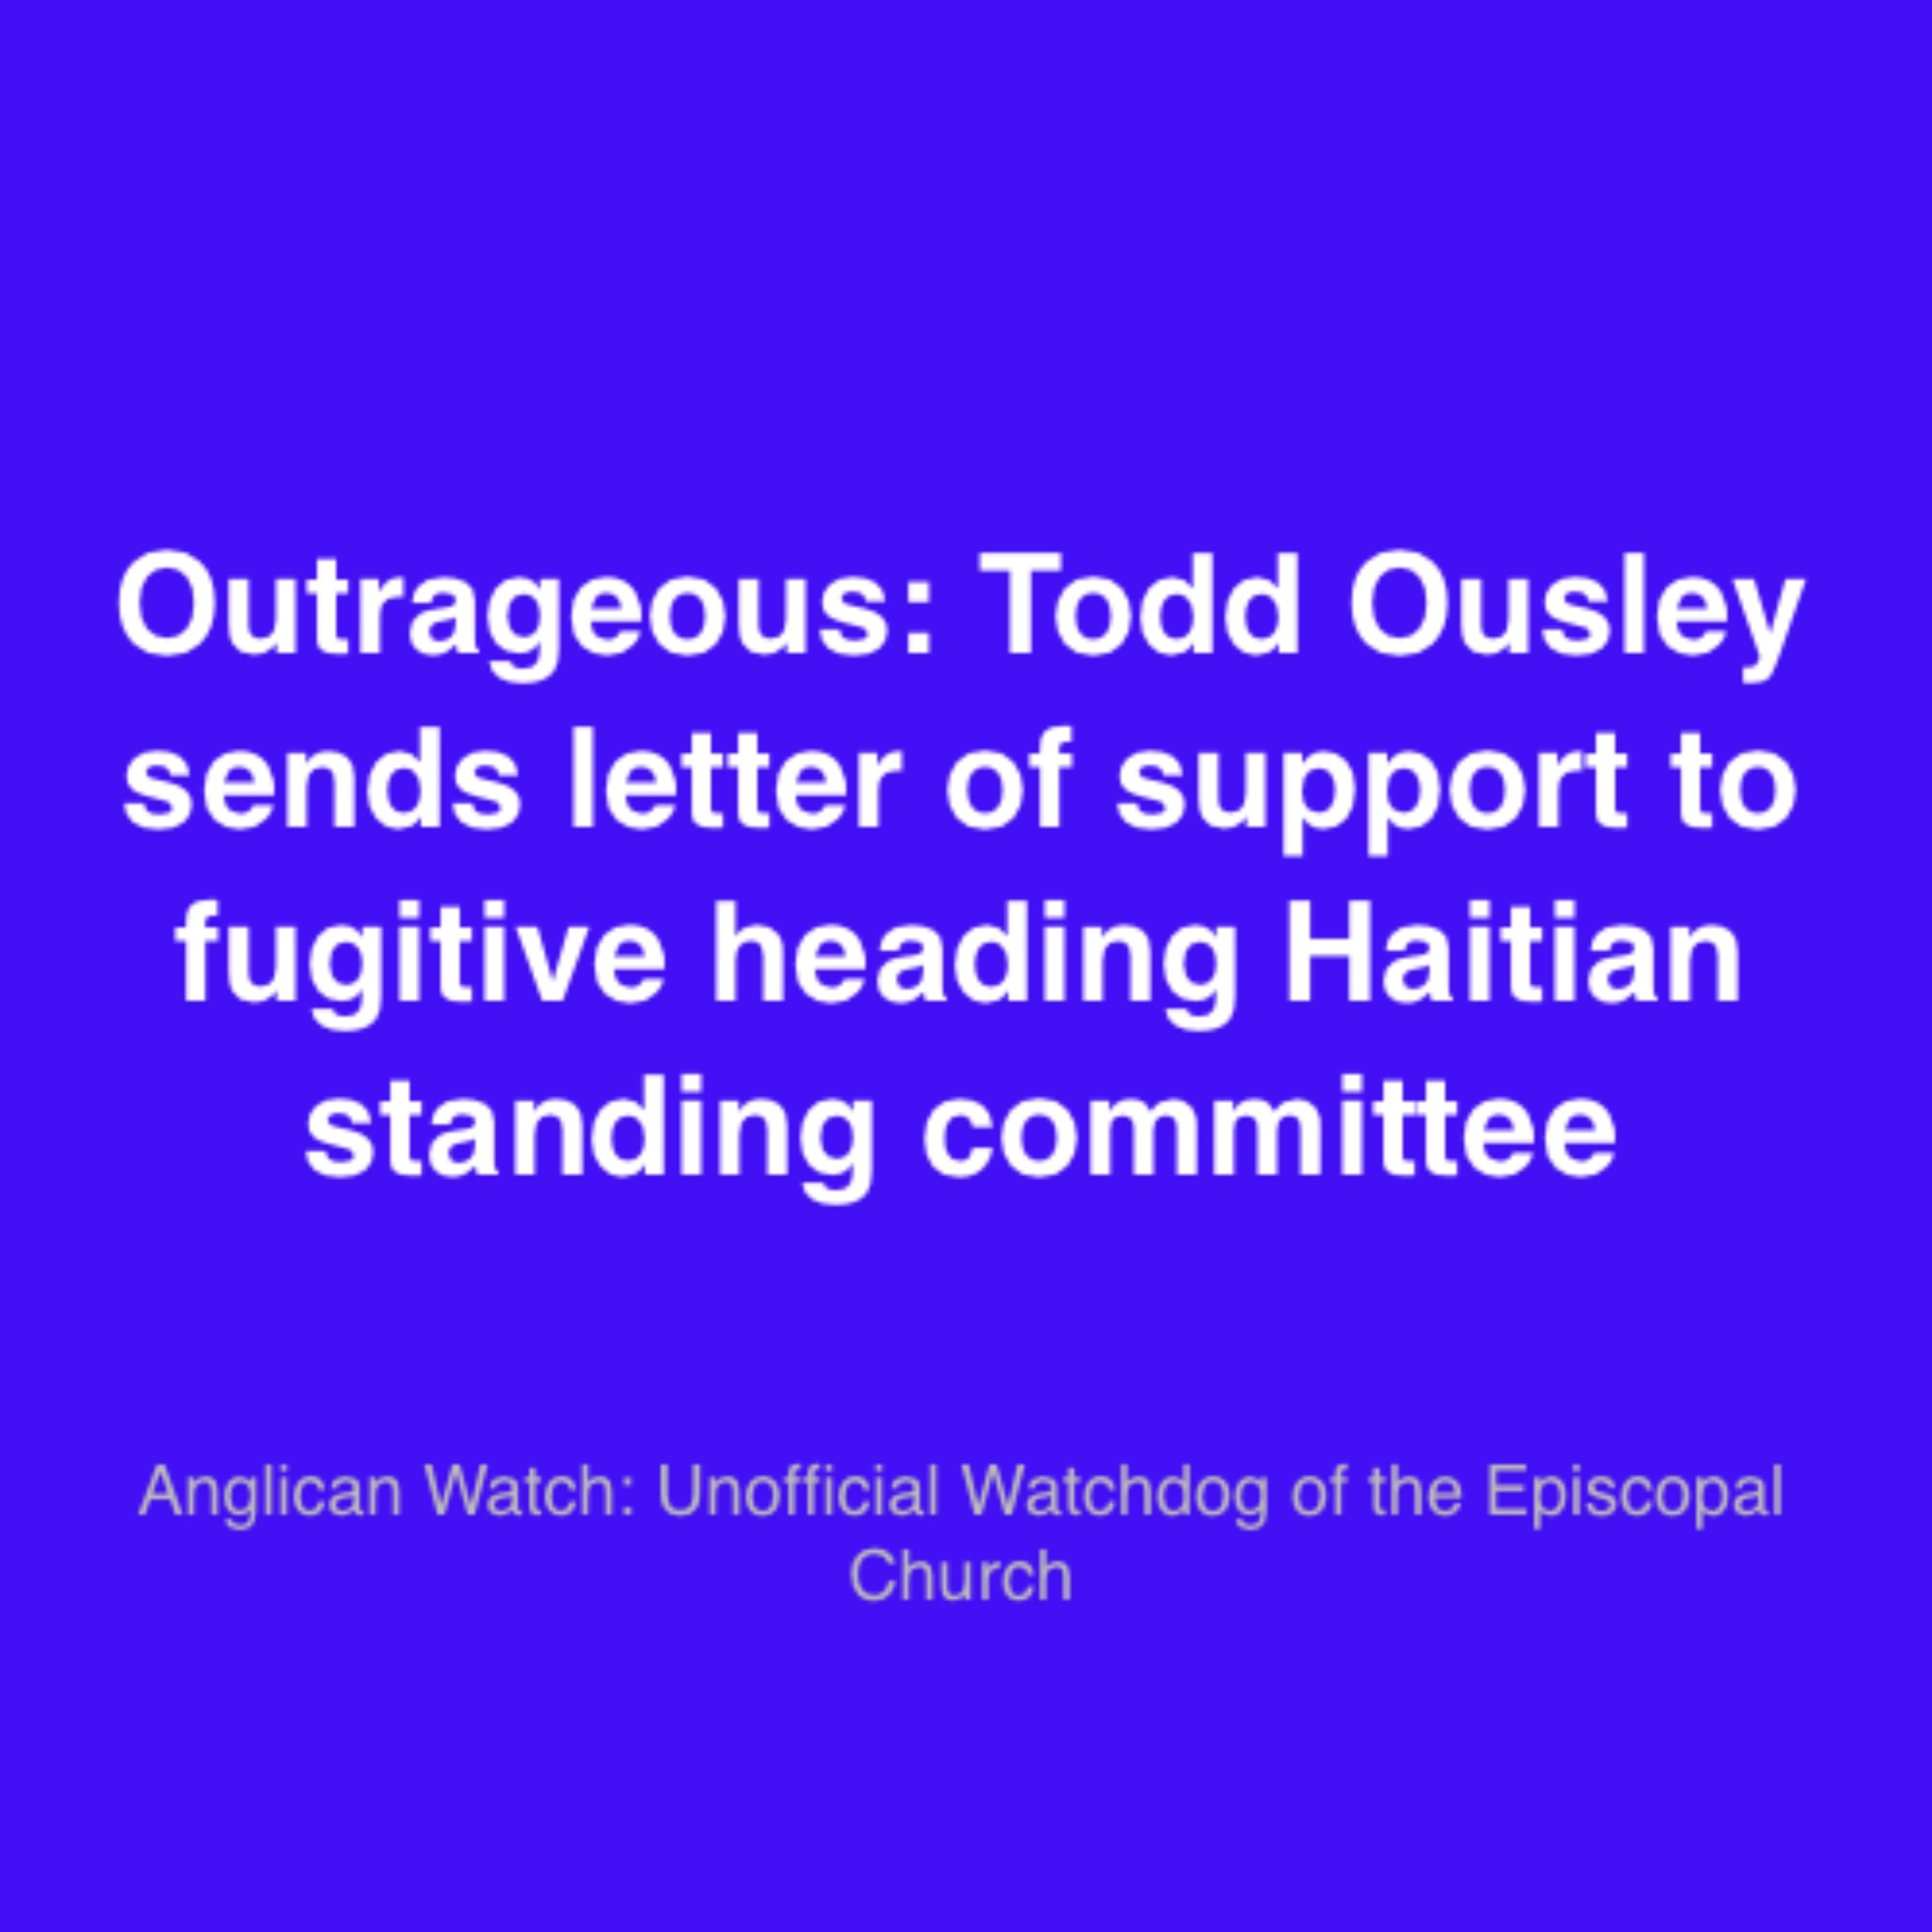 Outrageous: Todd Ousley sends letter of support to fugitive heading Haitian standing committee